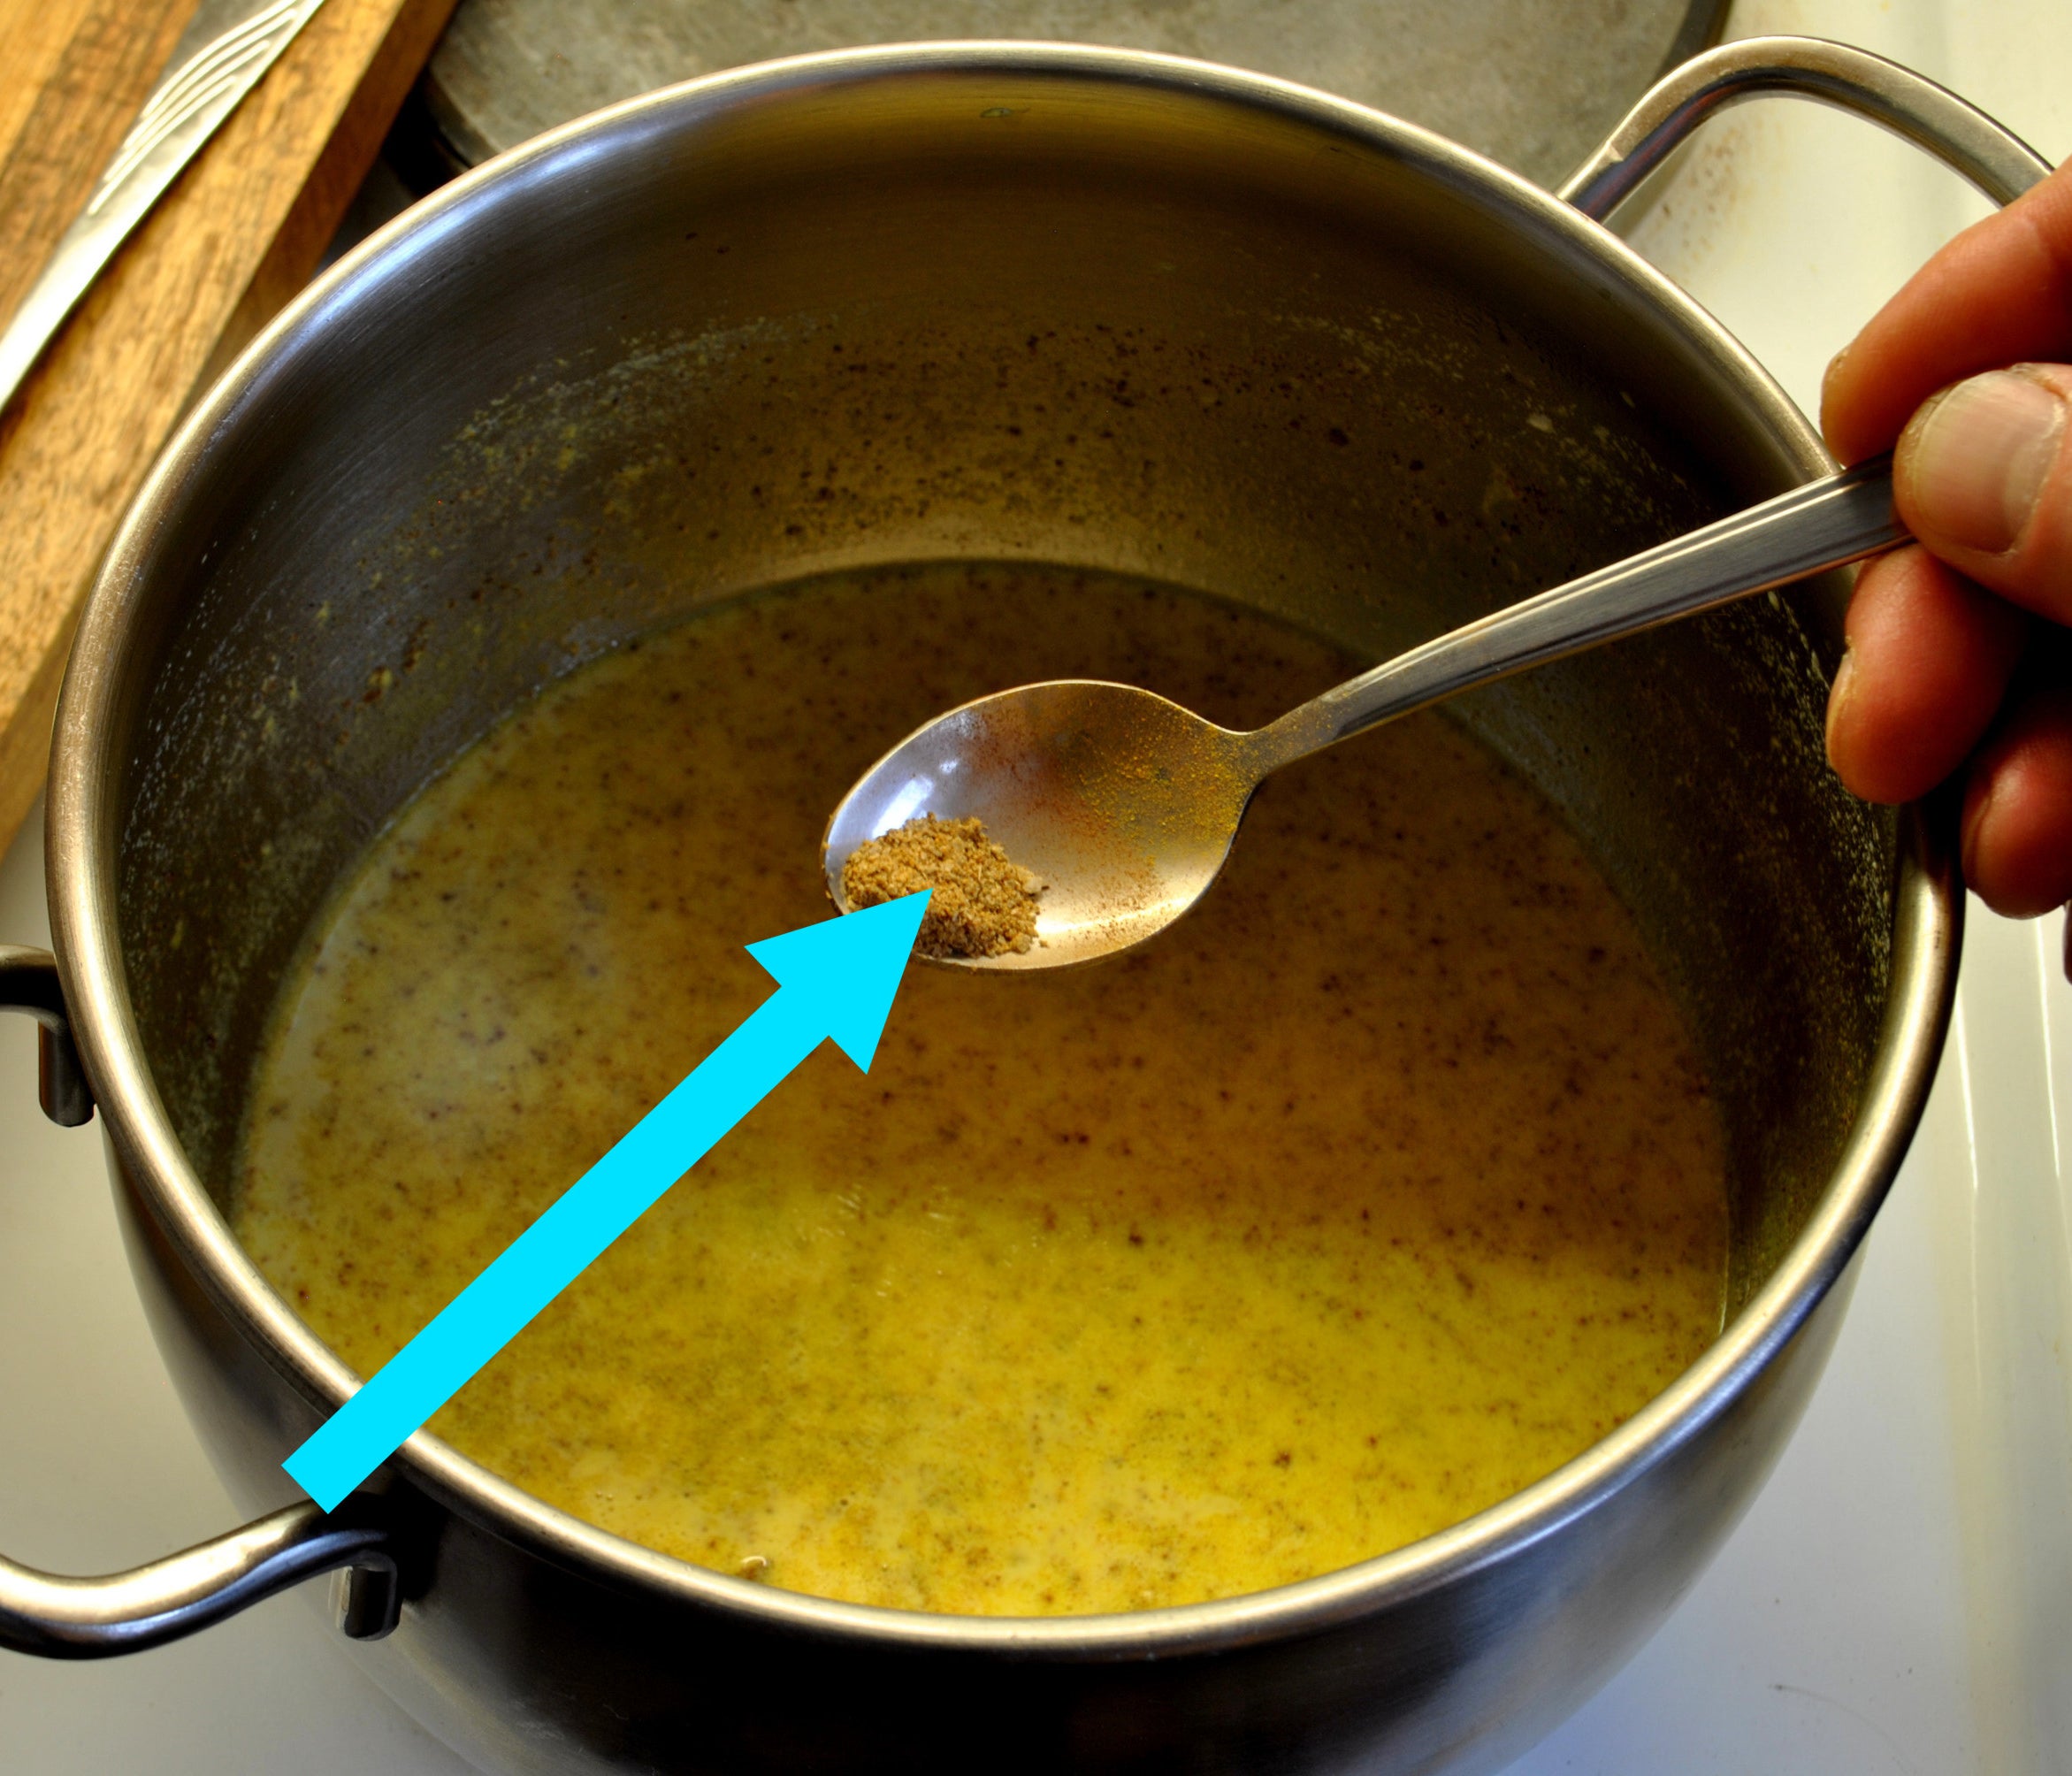 ground cardamom in a spoon being held above a pot